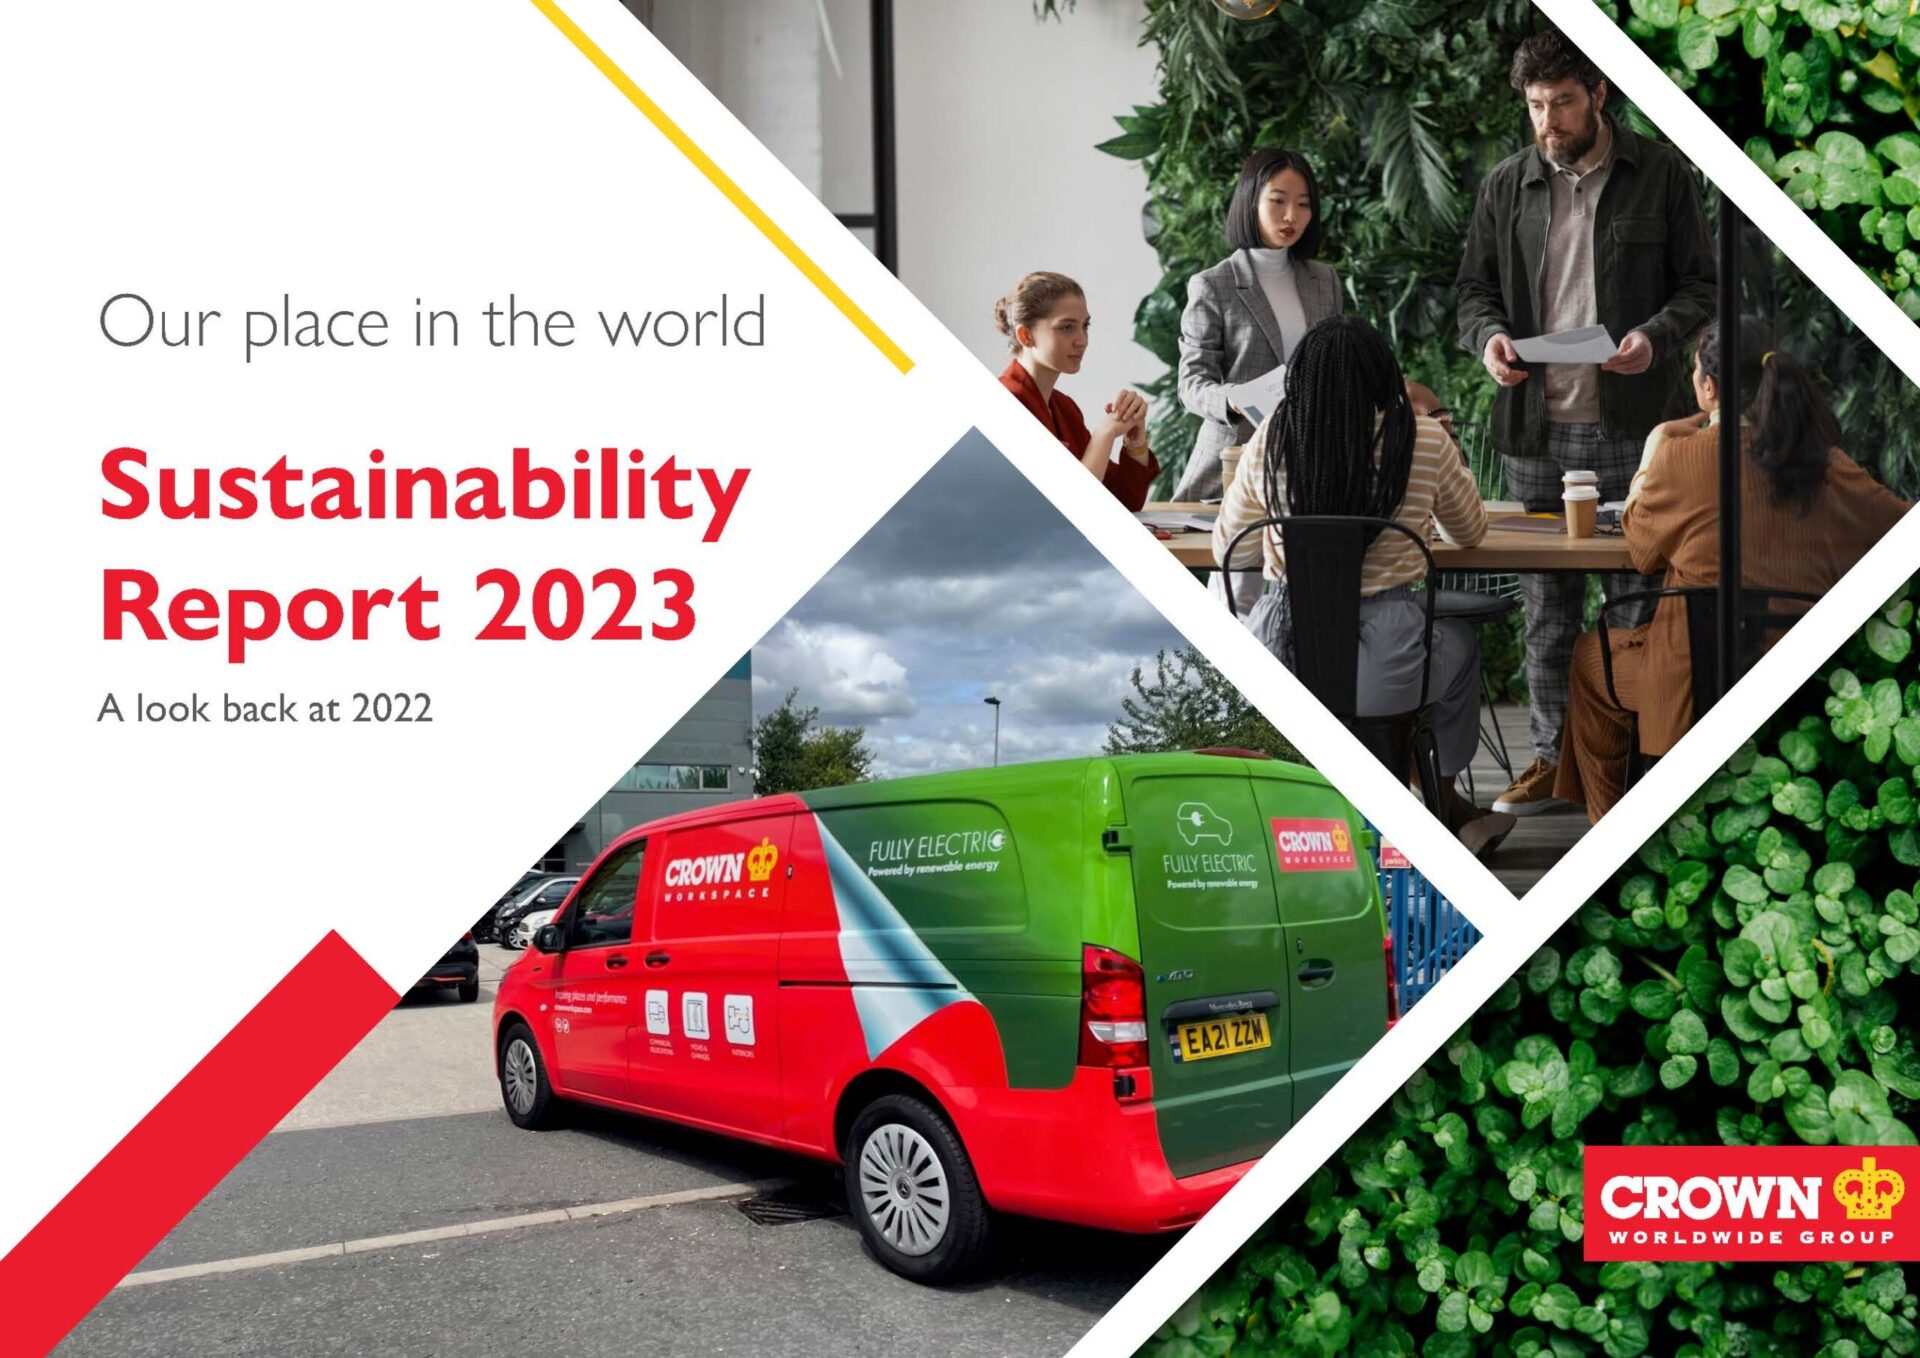 crown-worldwide-group-sustainability-report-2023